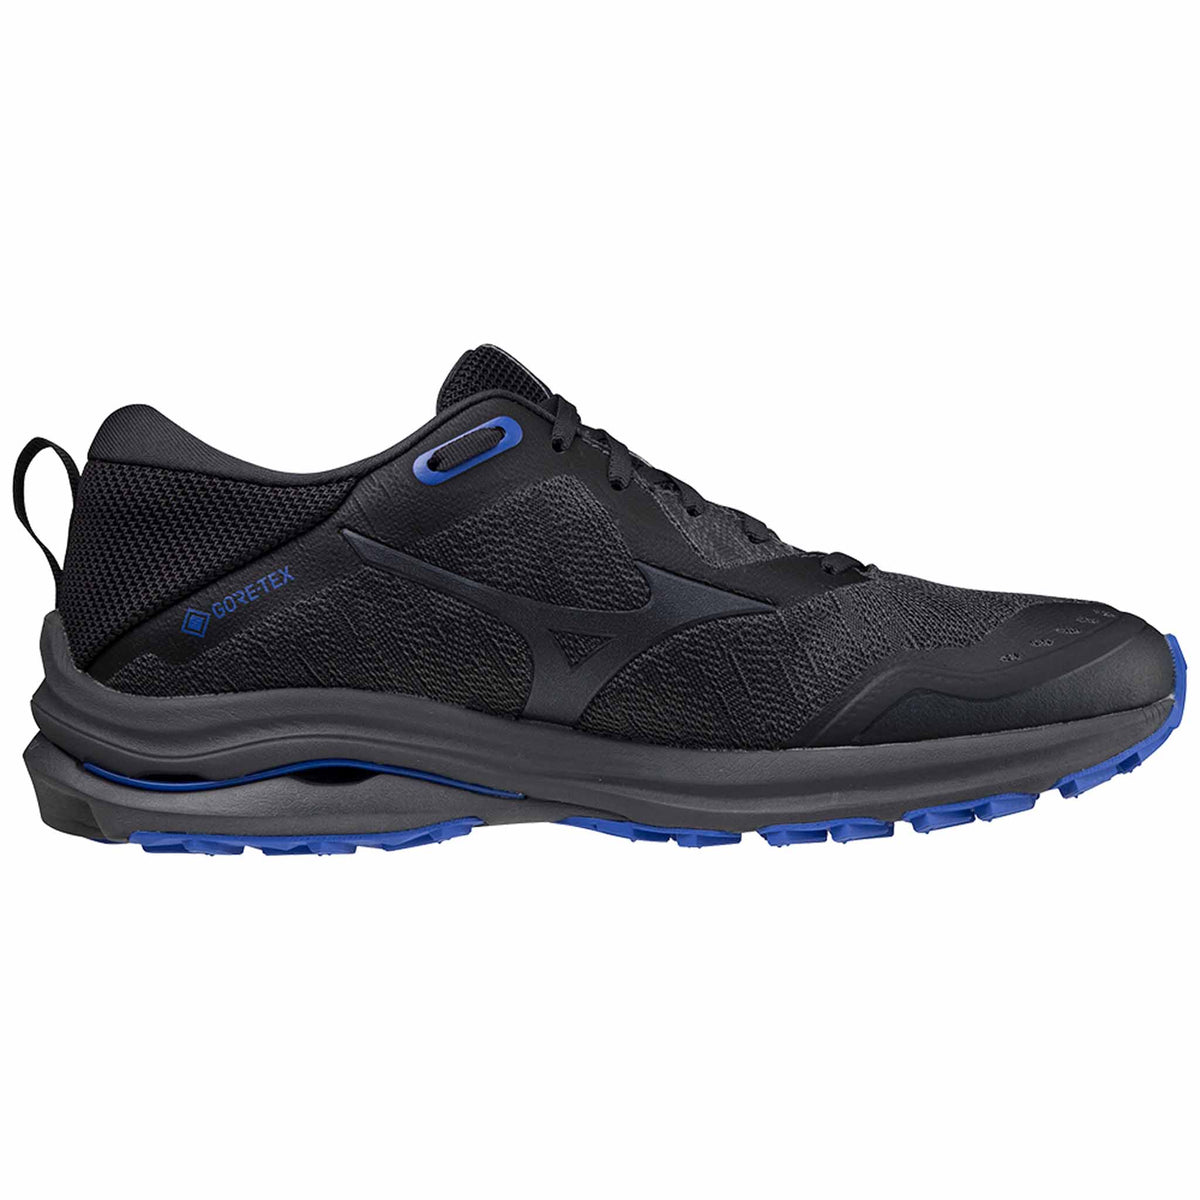 Mizuno Wave Rider GTX chaussures de course à pied homme - blackened pearl lateral